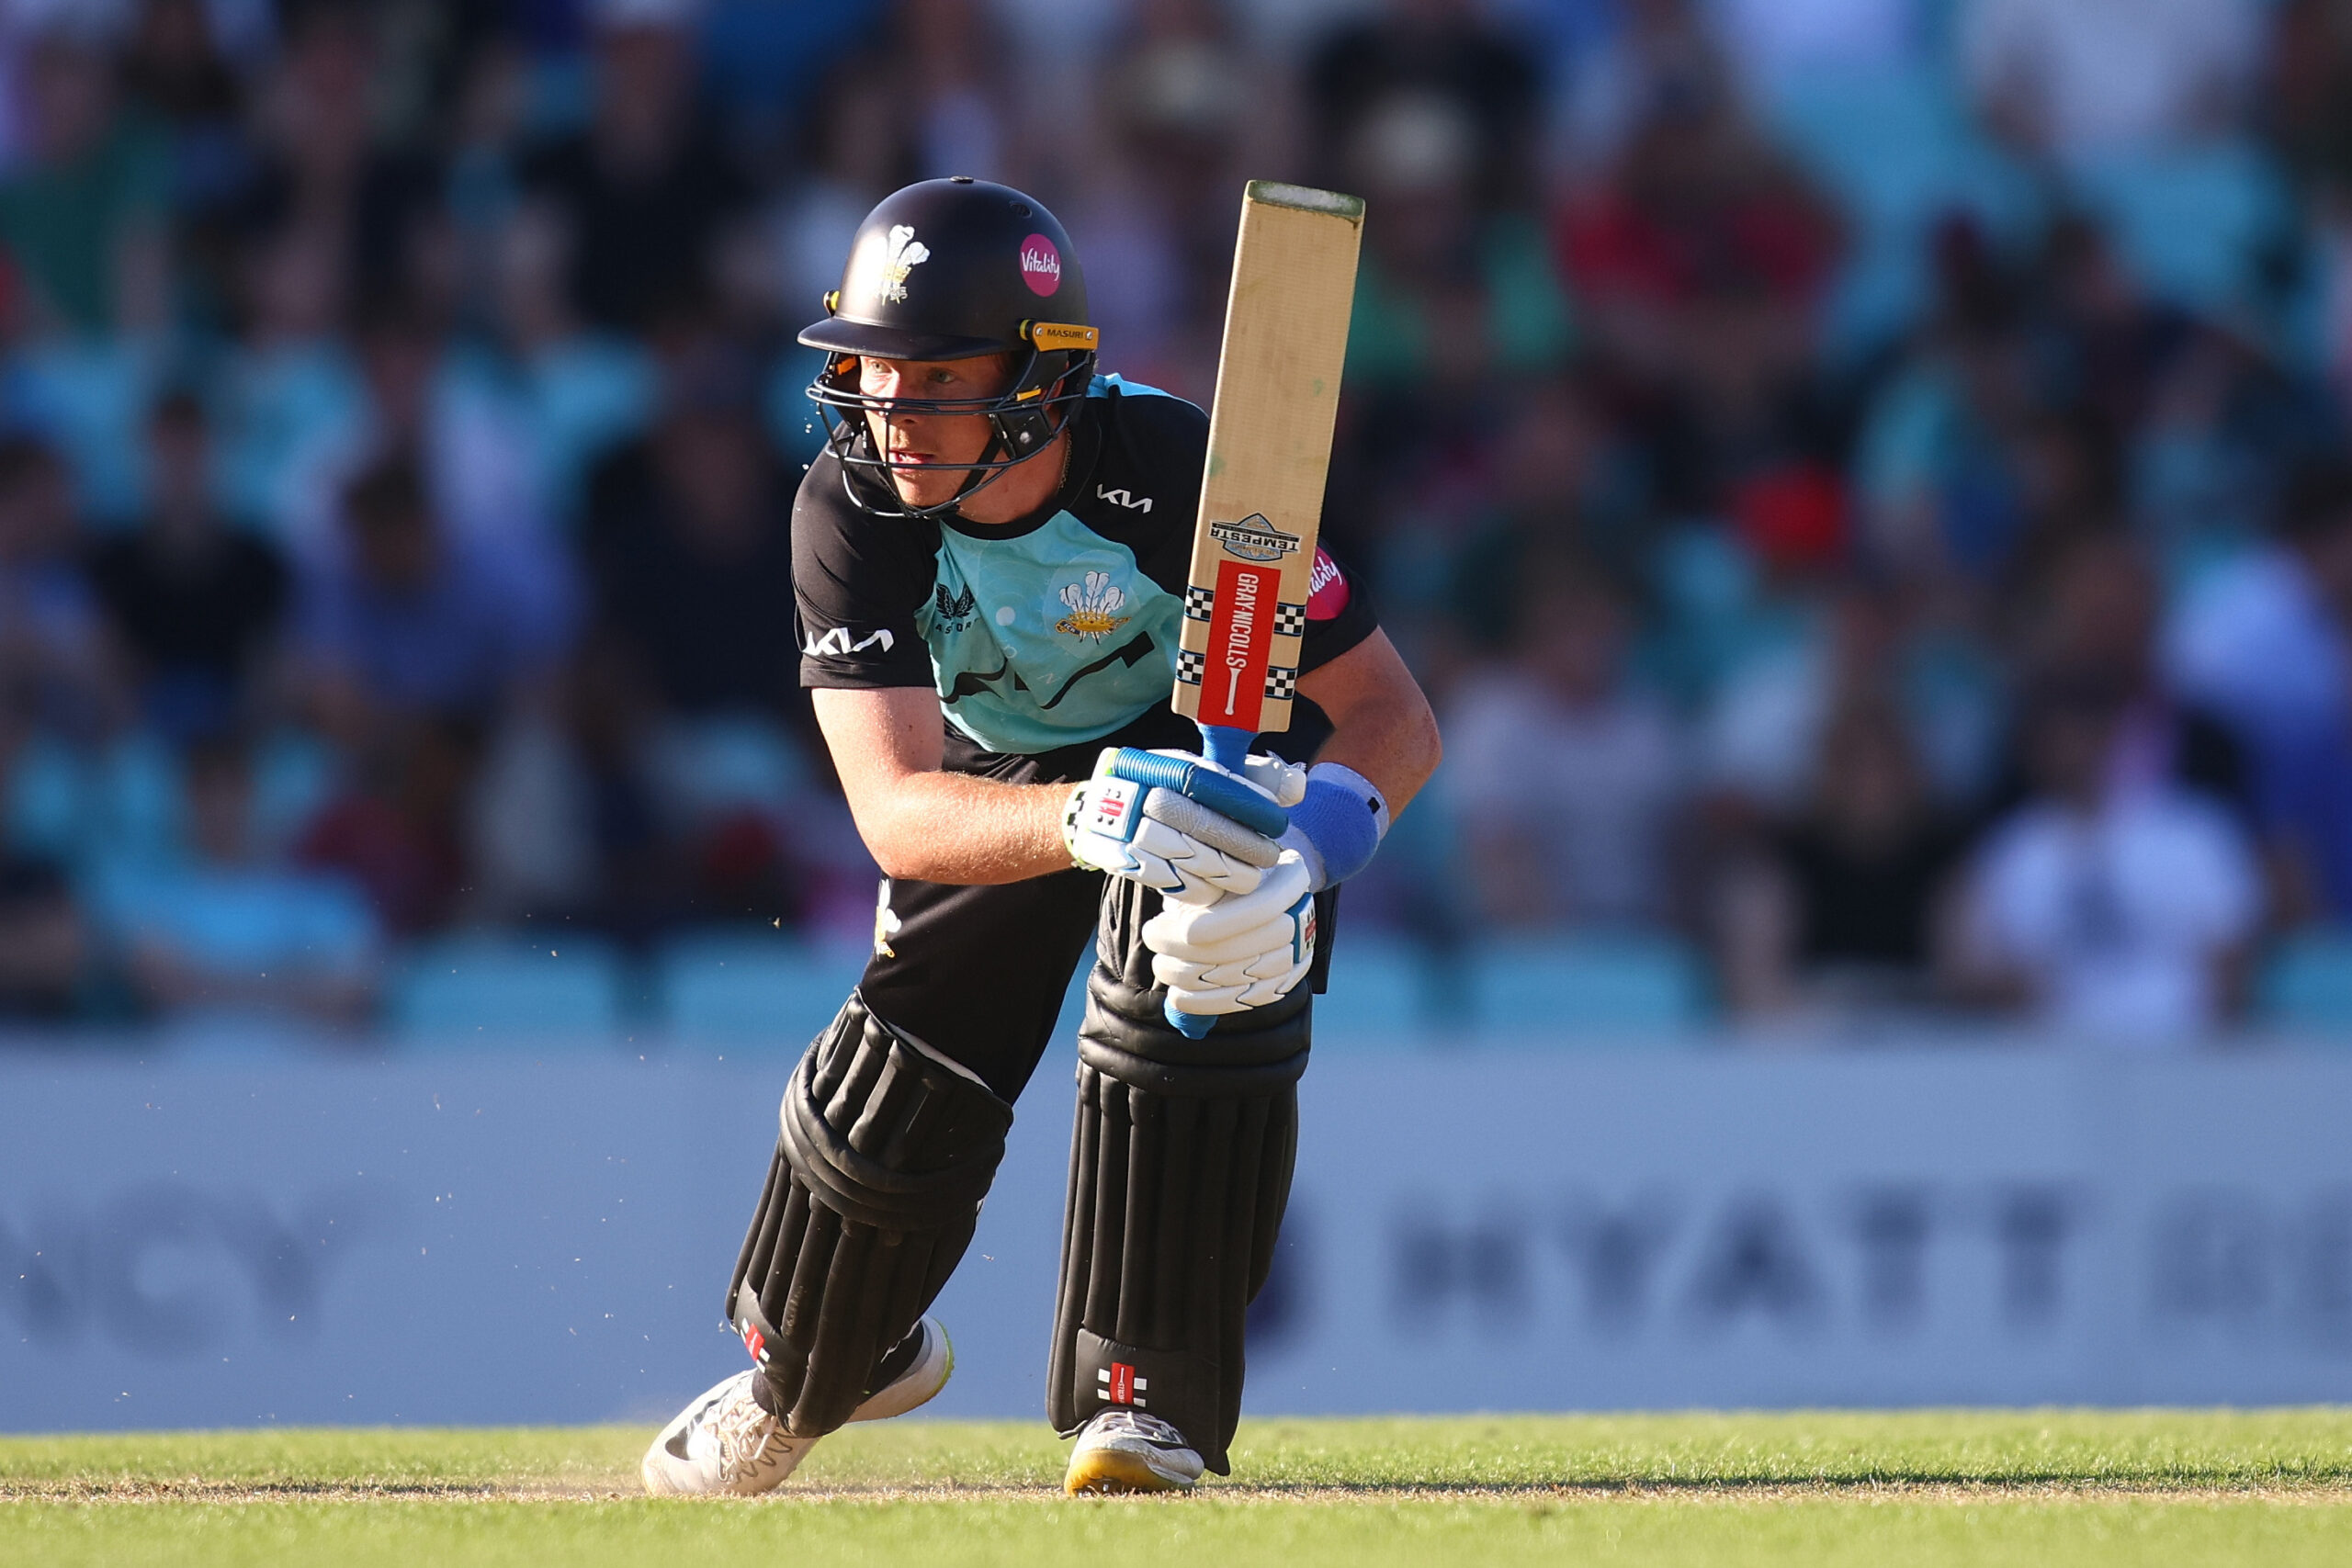 Surrey vs Sussex Sharks: Full Preview